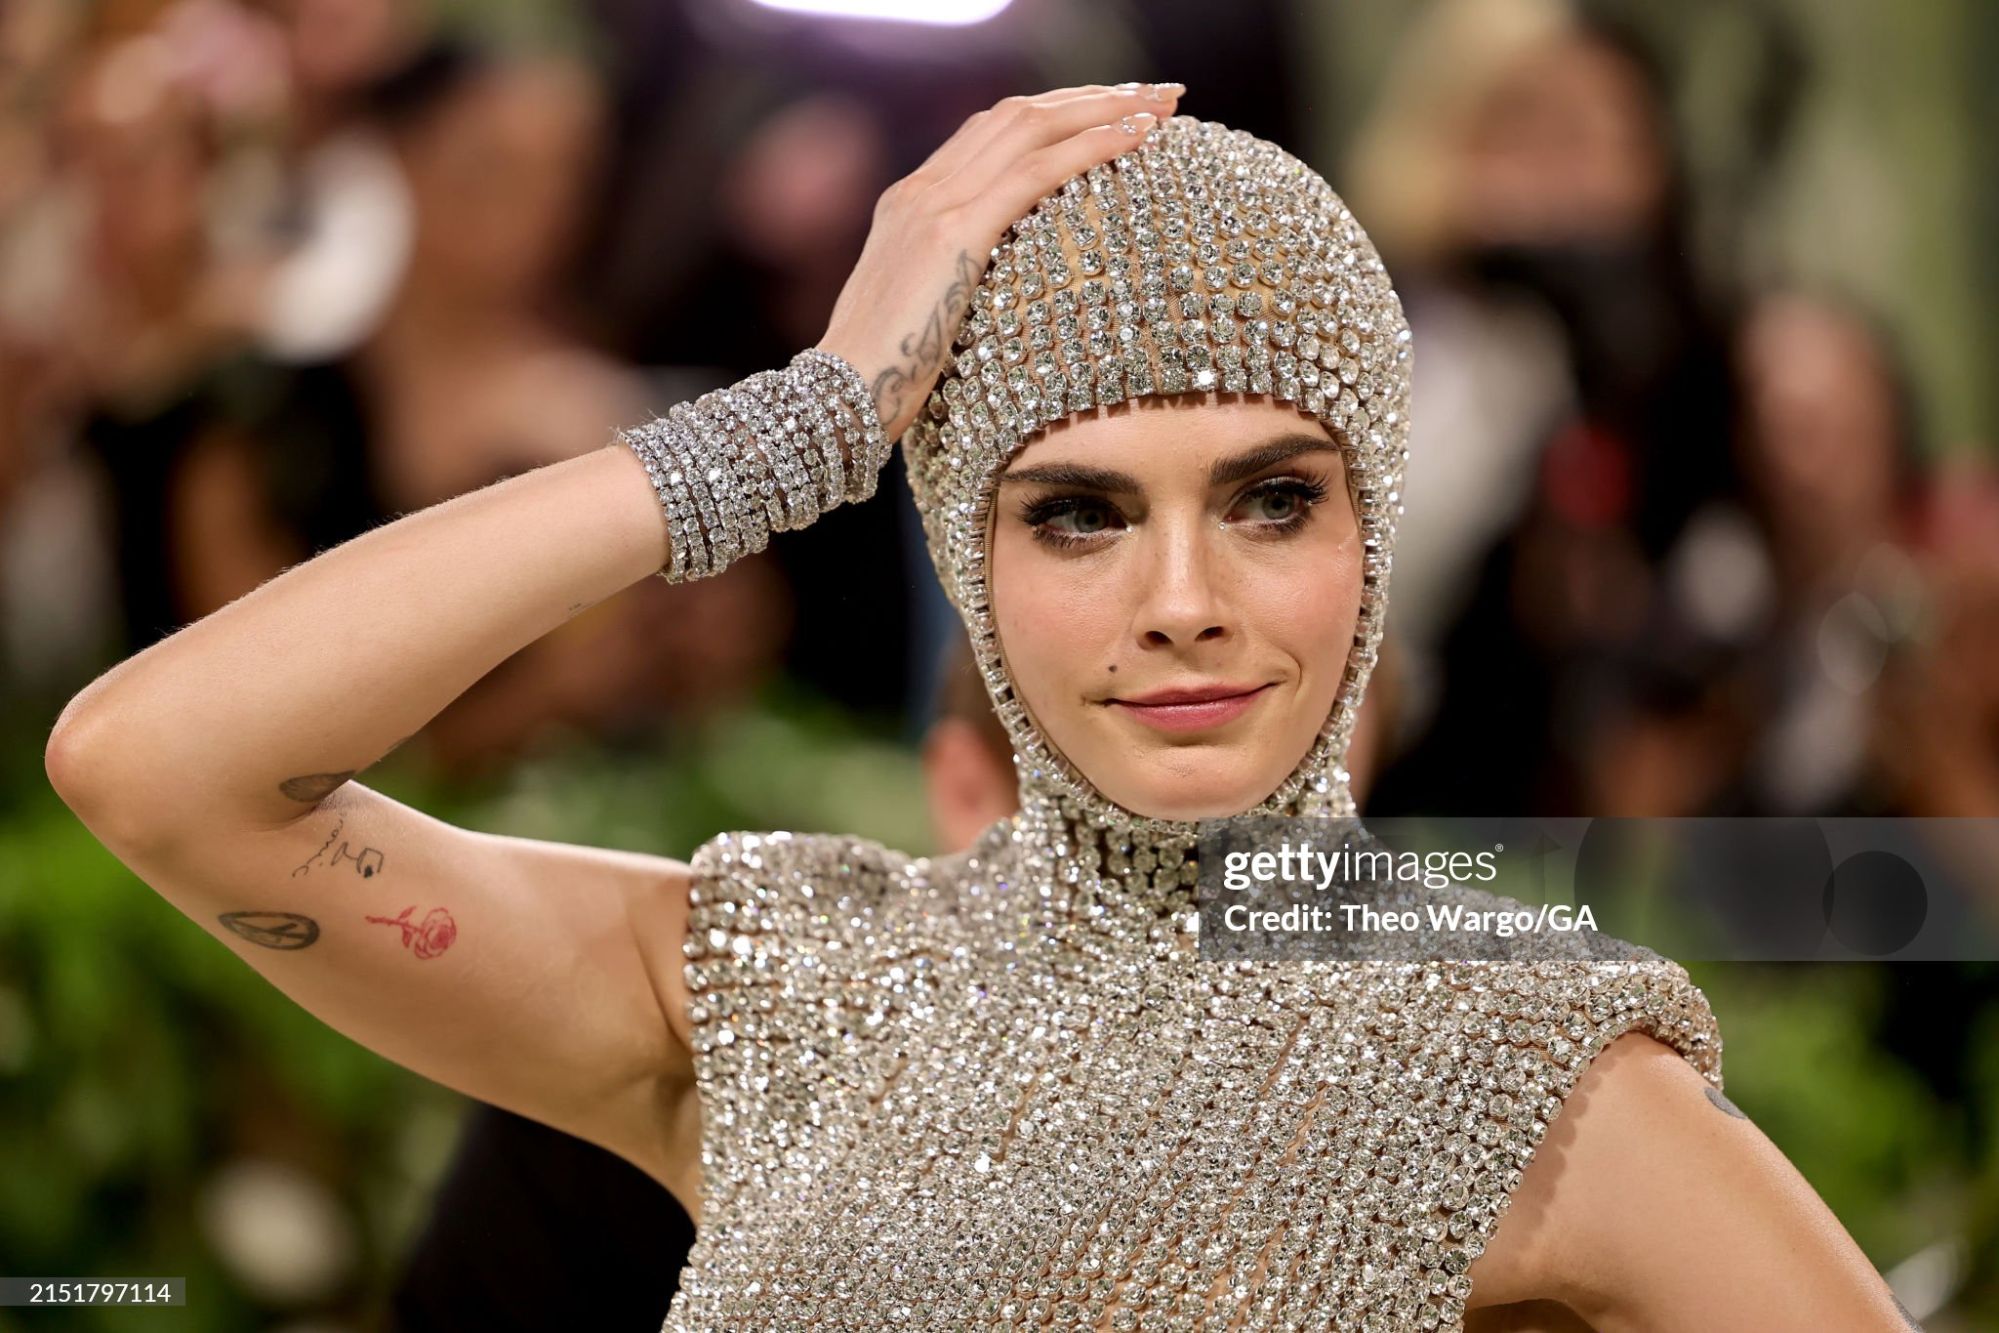 gettyimages-2151797114-2048x2048.jpg